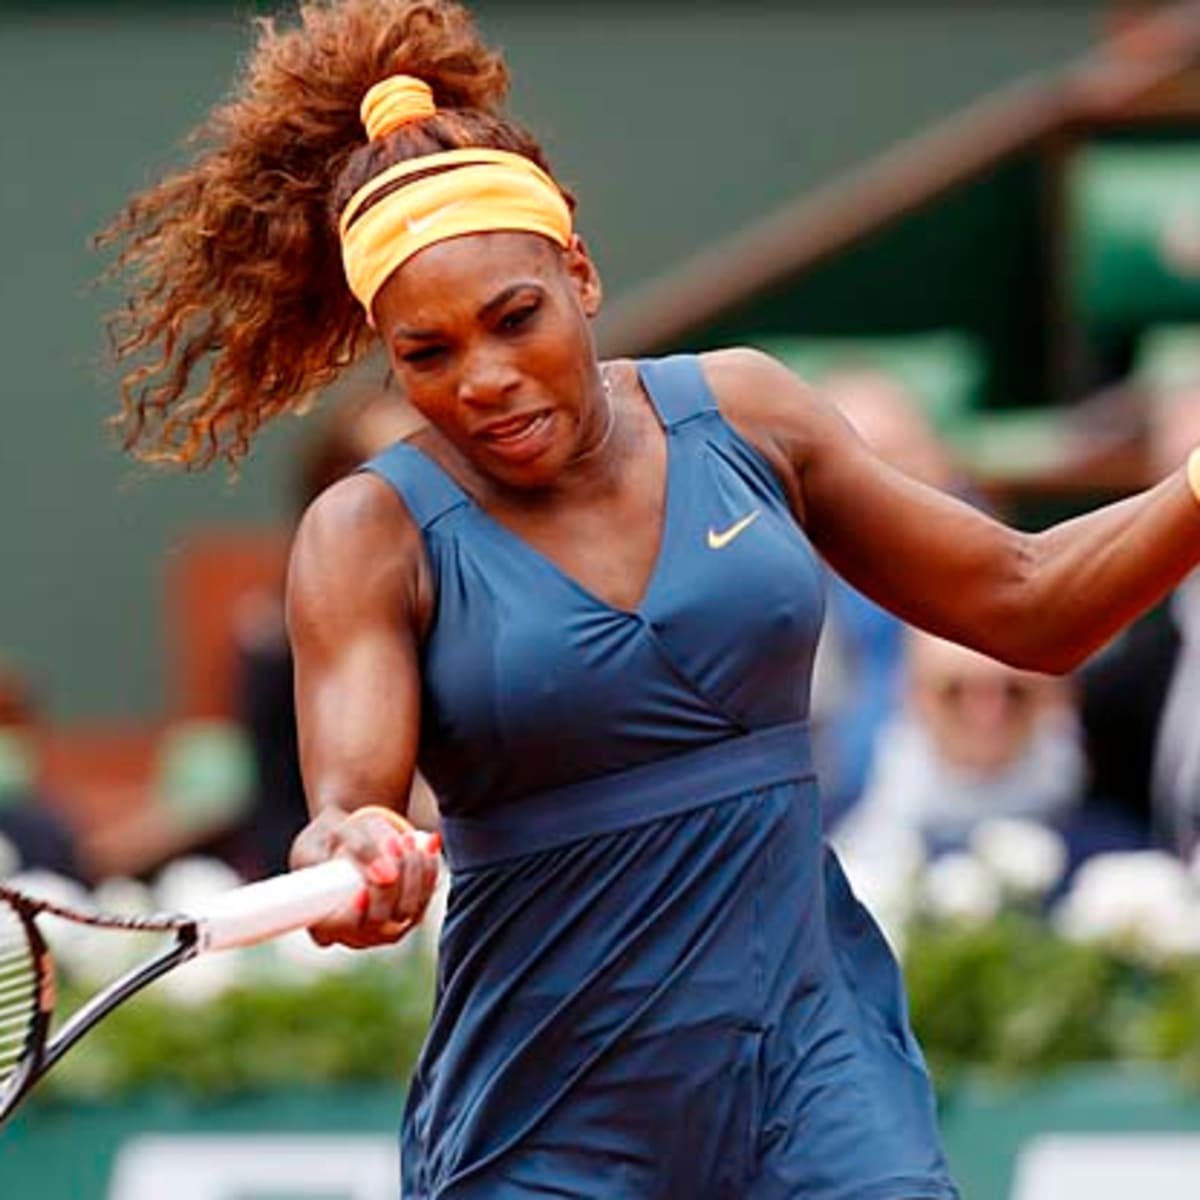 Roger Federer withdraws from French Open, Serena Williams bounced in 4th  round